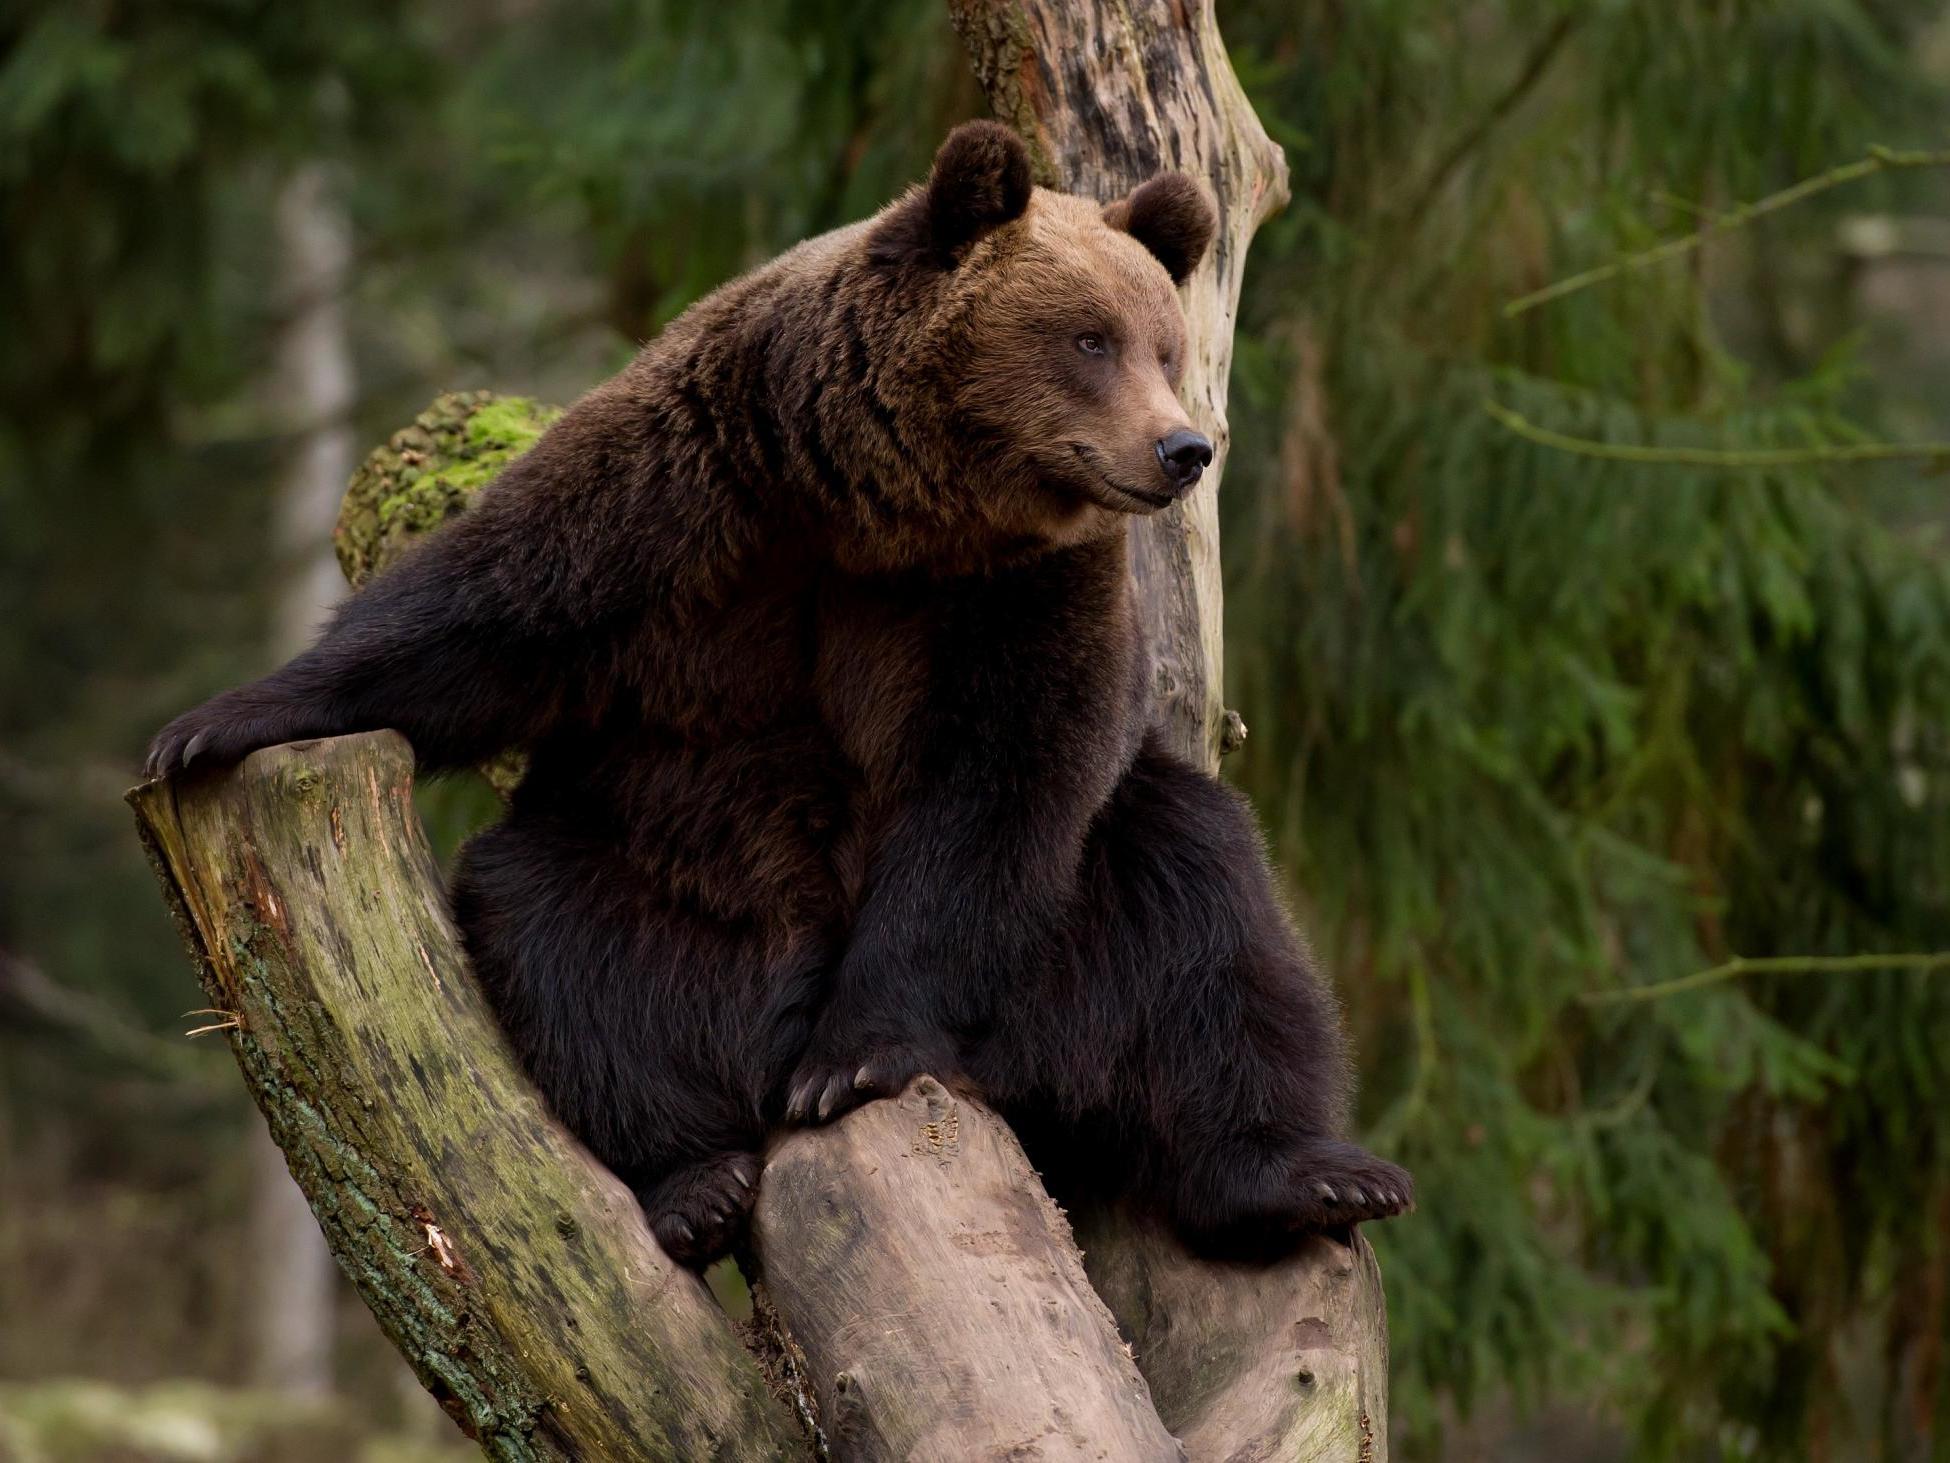 European brown bears, which are thought to have disappeared in the middle ages, will roam beside grey wolves in Bear Wood